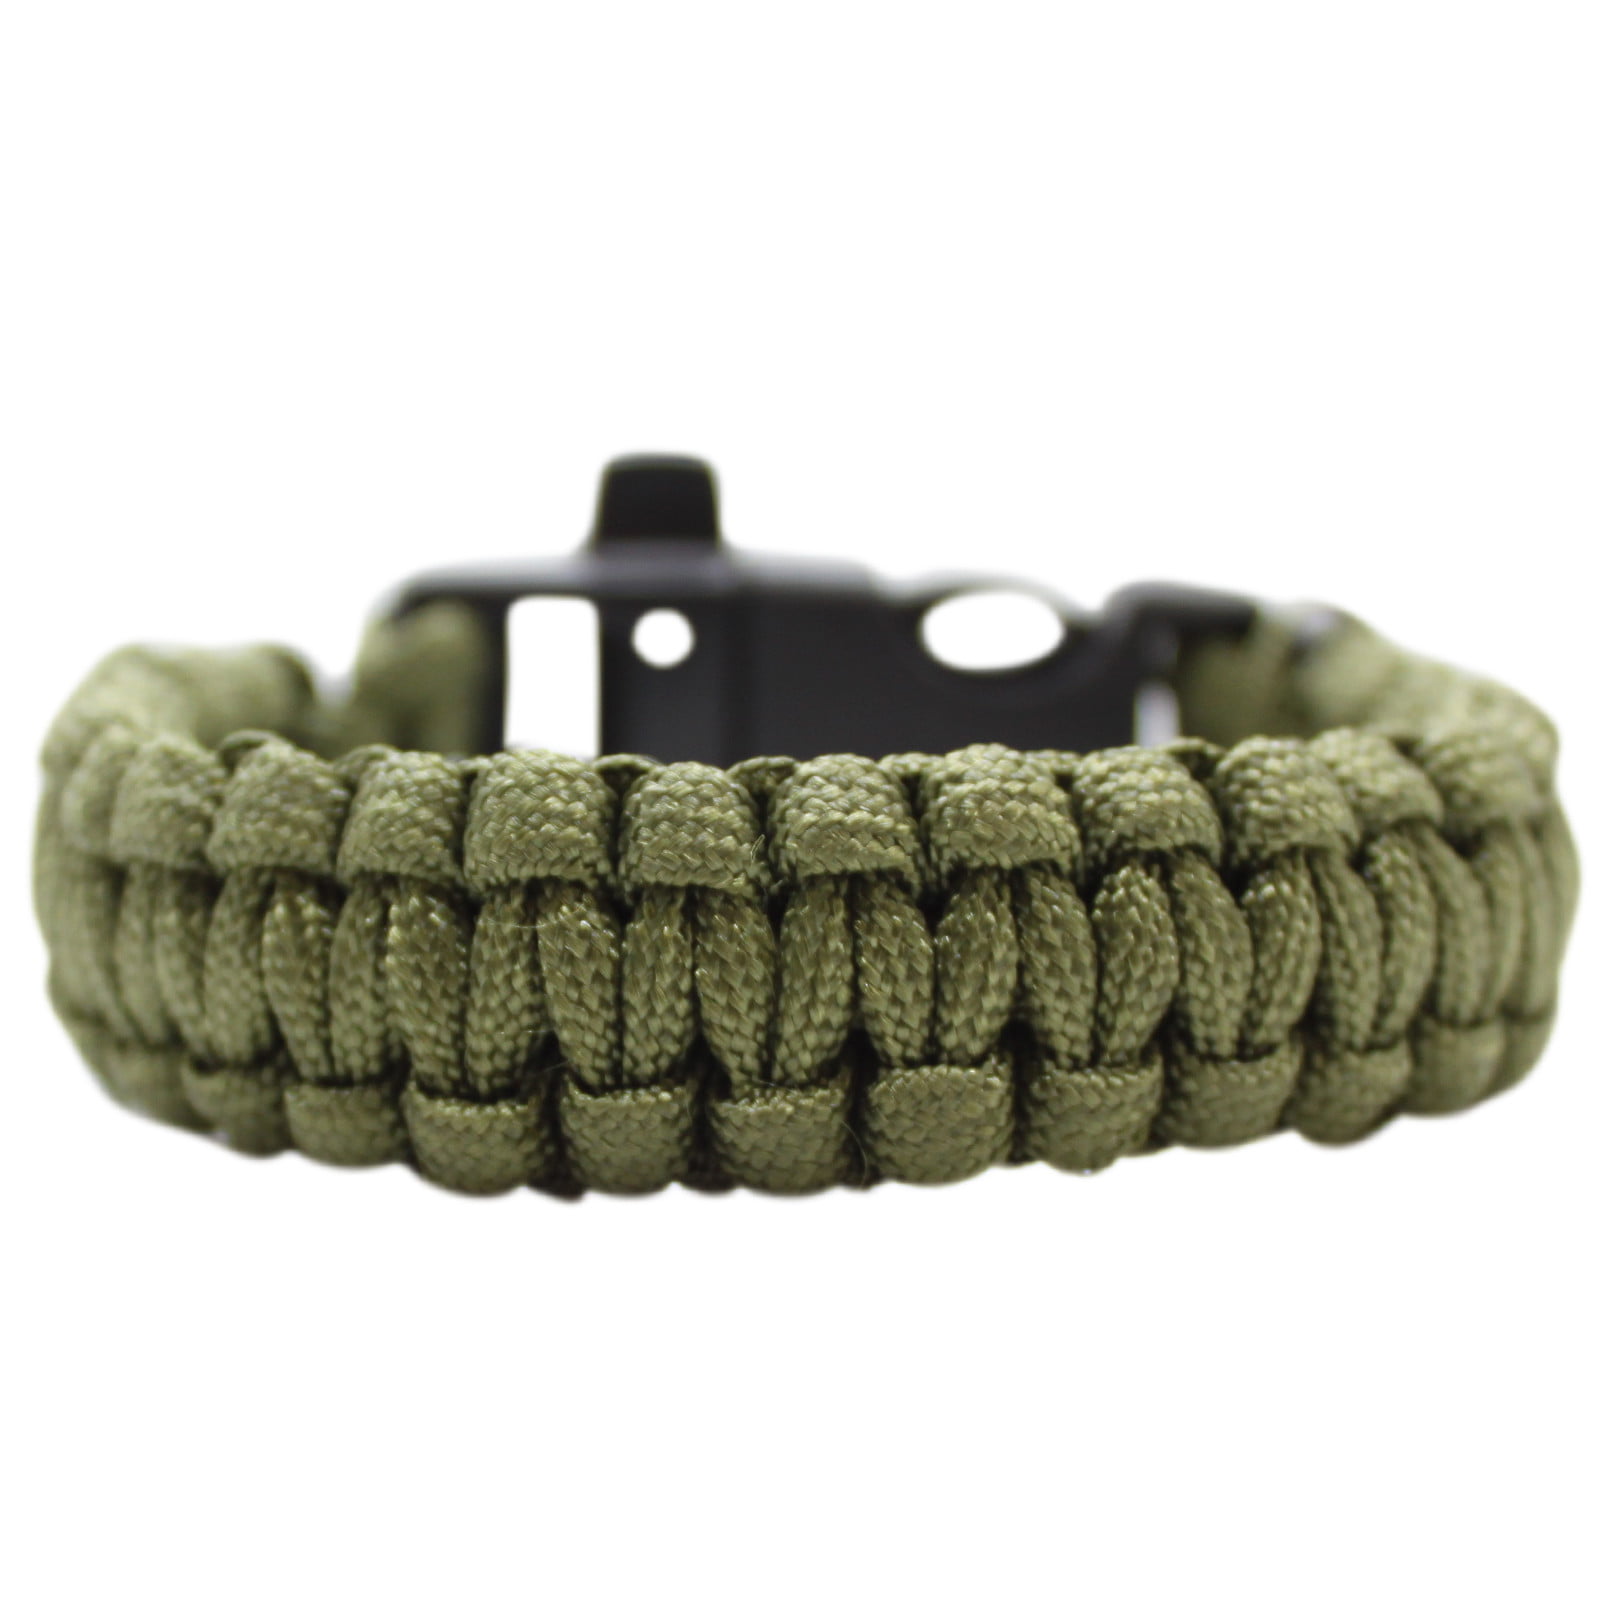 New Paracord Parachute Cord Emergency Survival Hiking Bracelet Army green 